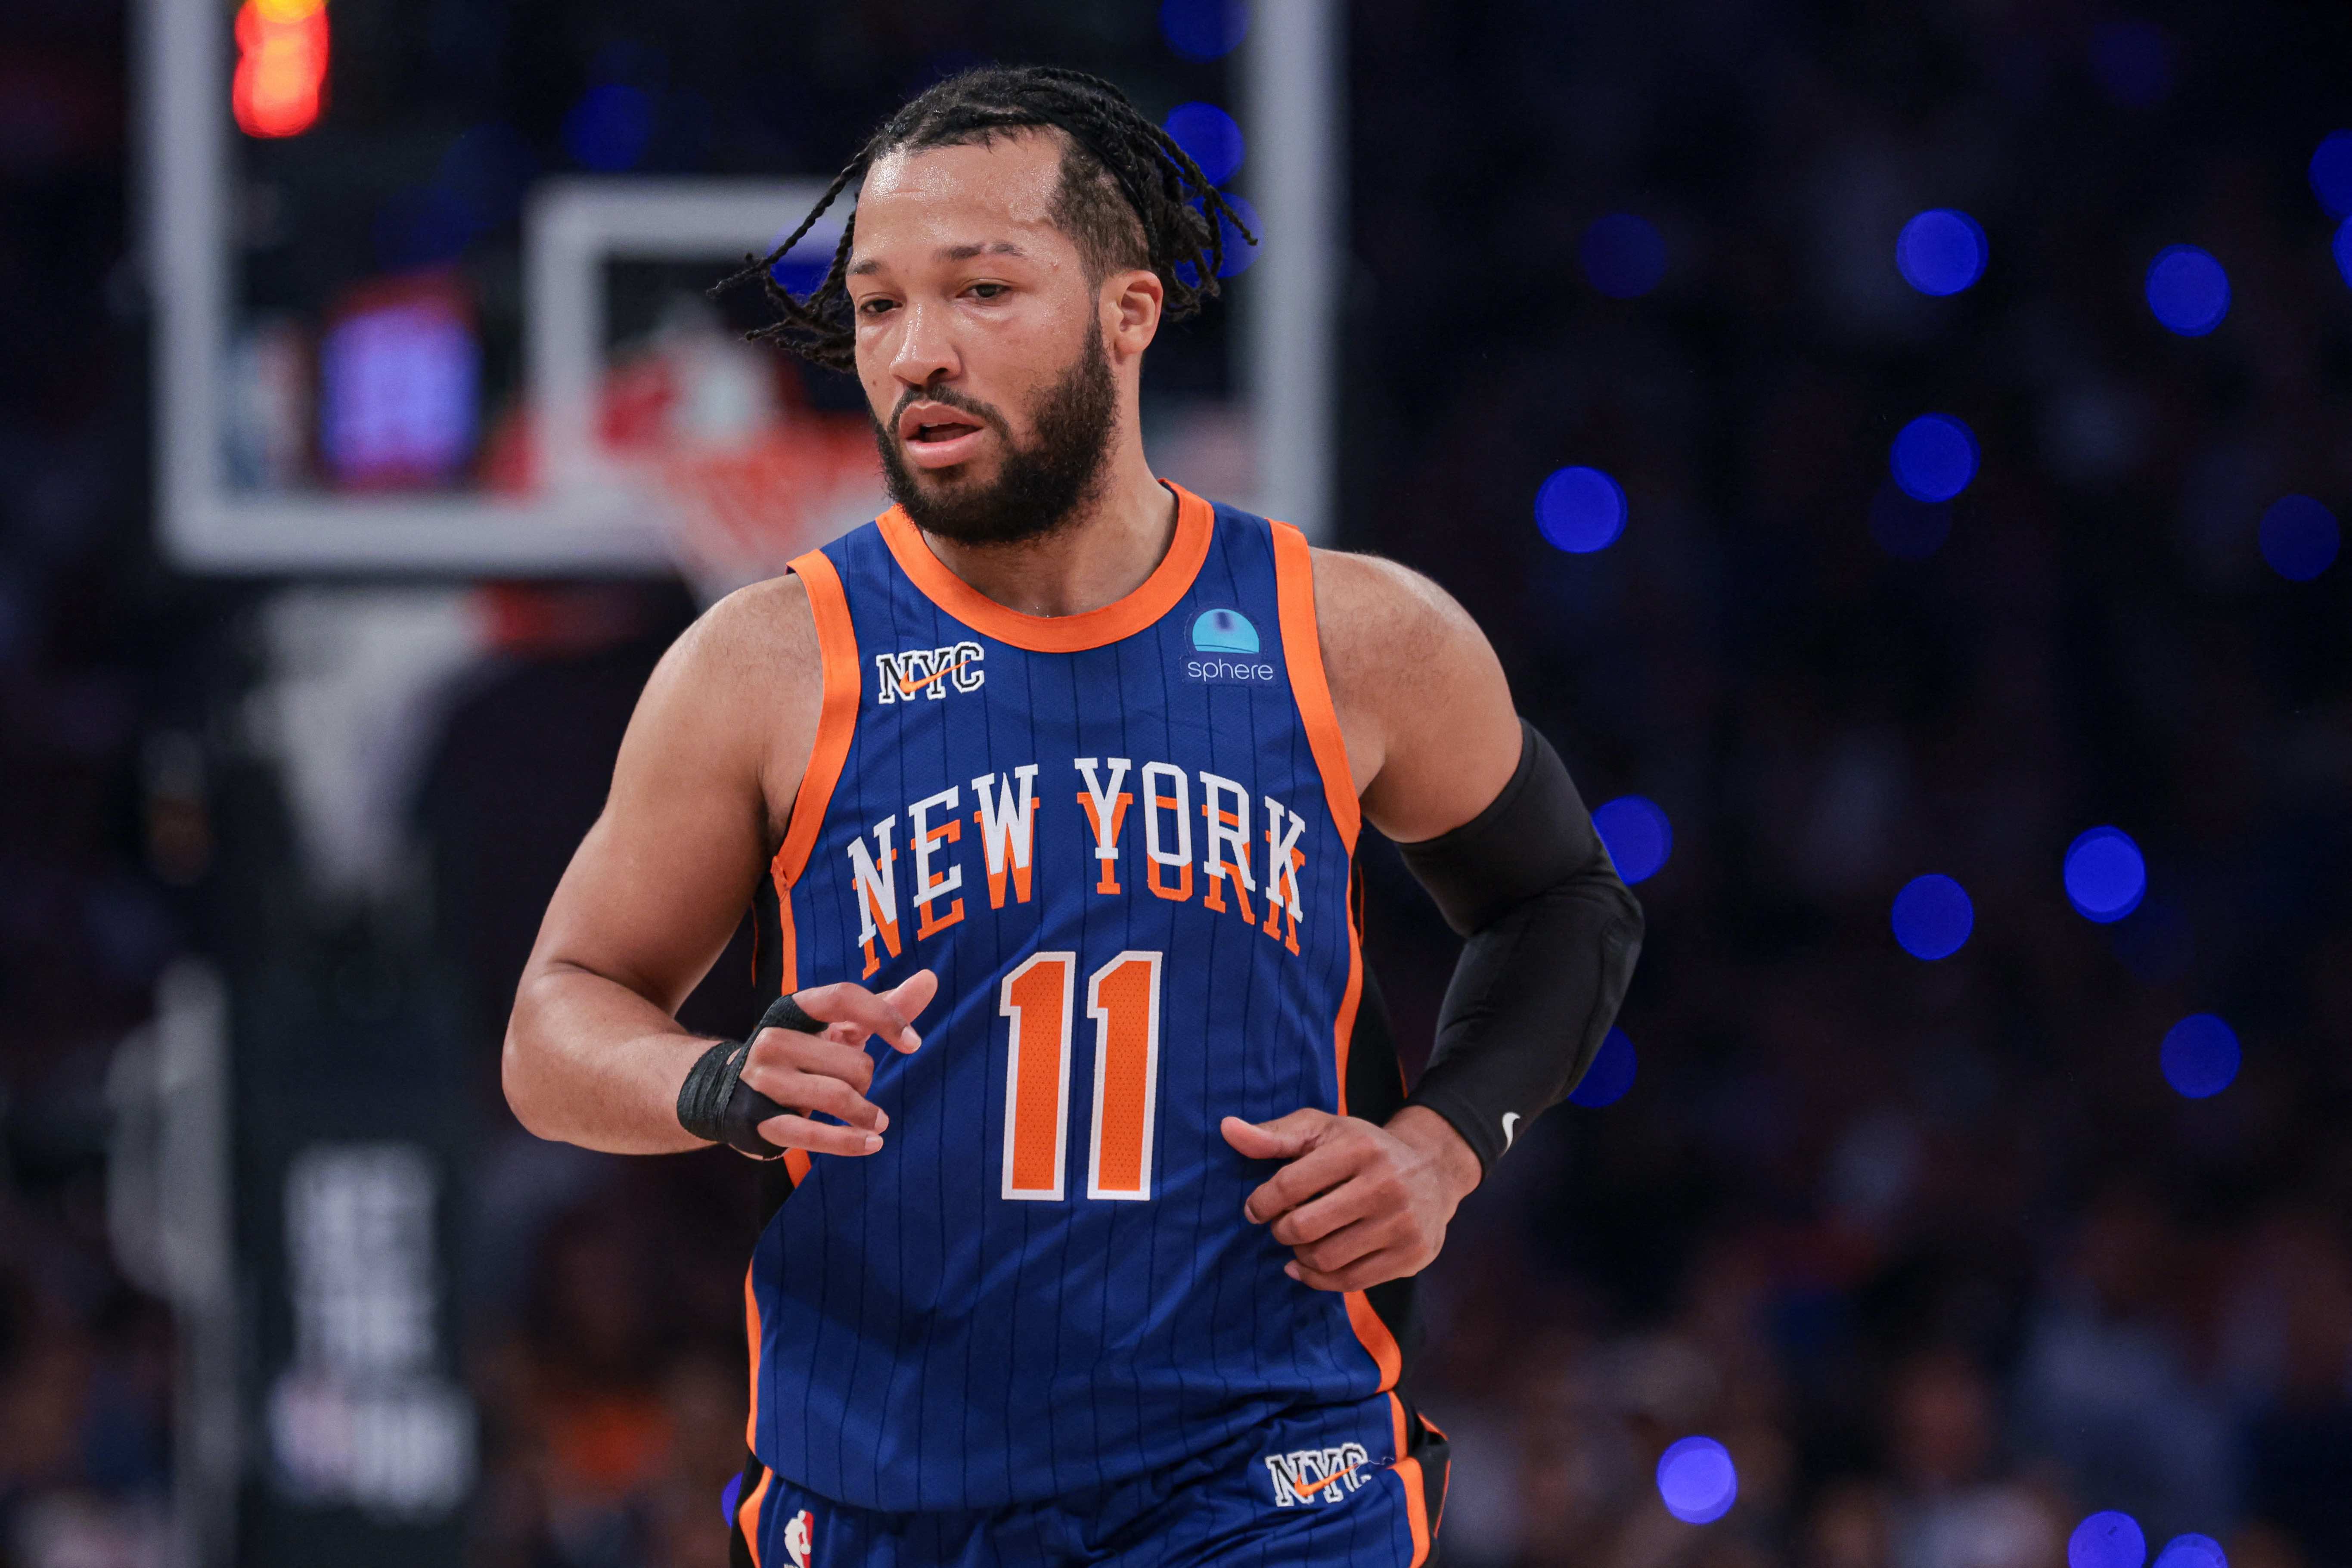 NBA: Knicks sign Jalen Brunson to extension worth reported 6.5M